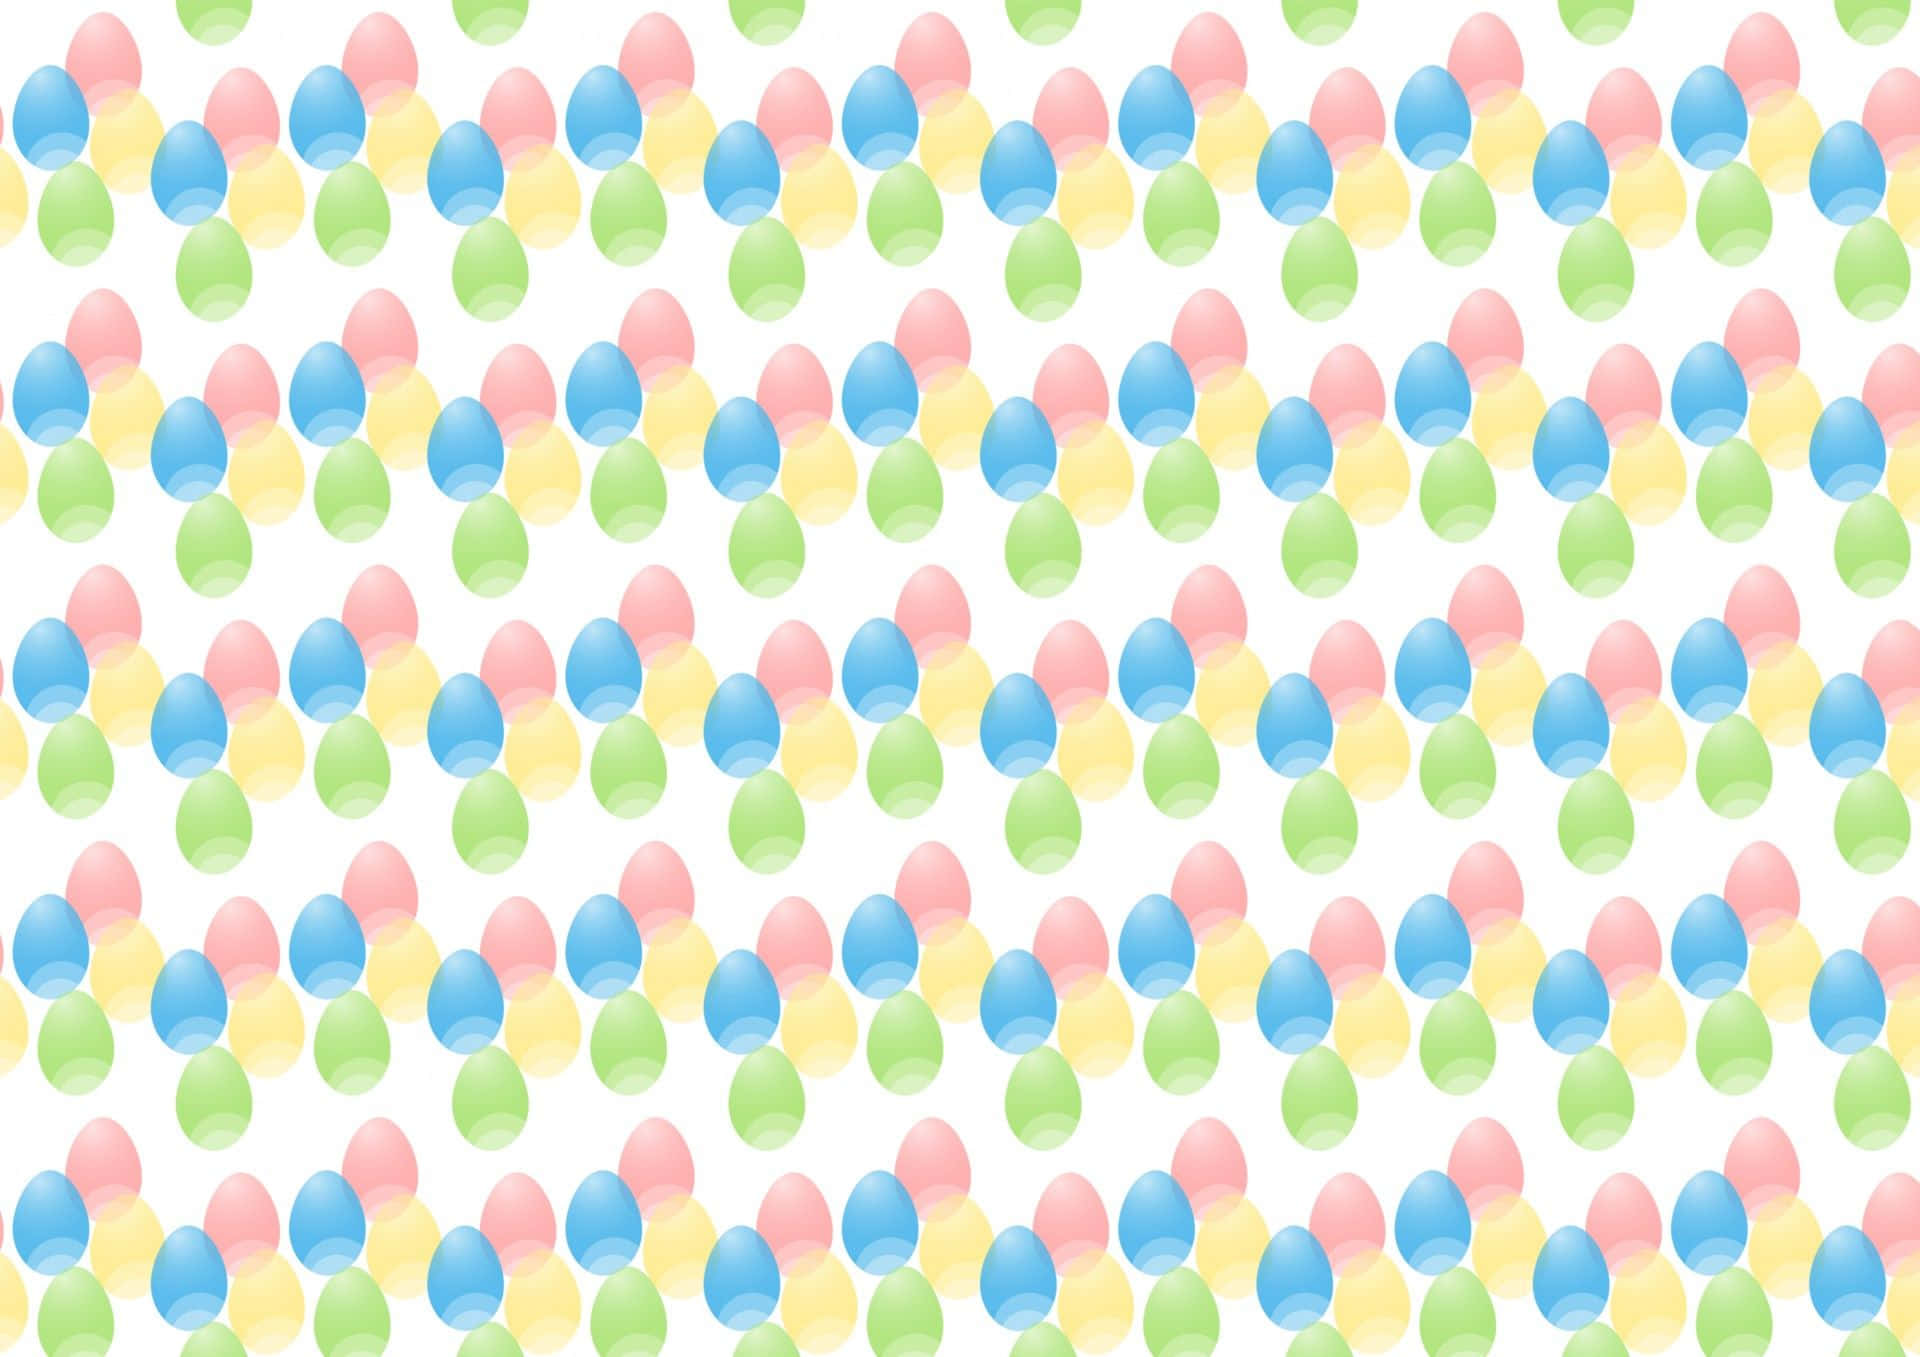 Celebrate Easter in Style with a Pastel Themed Background